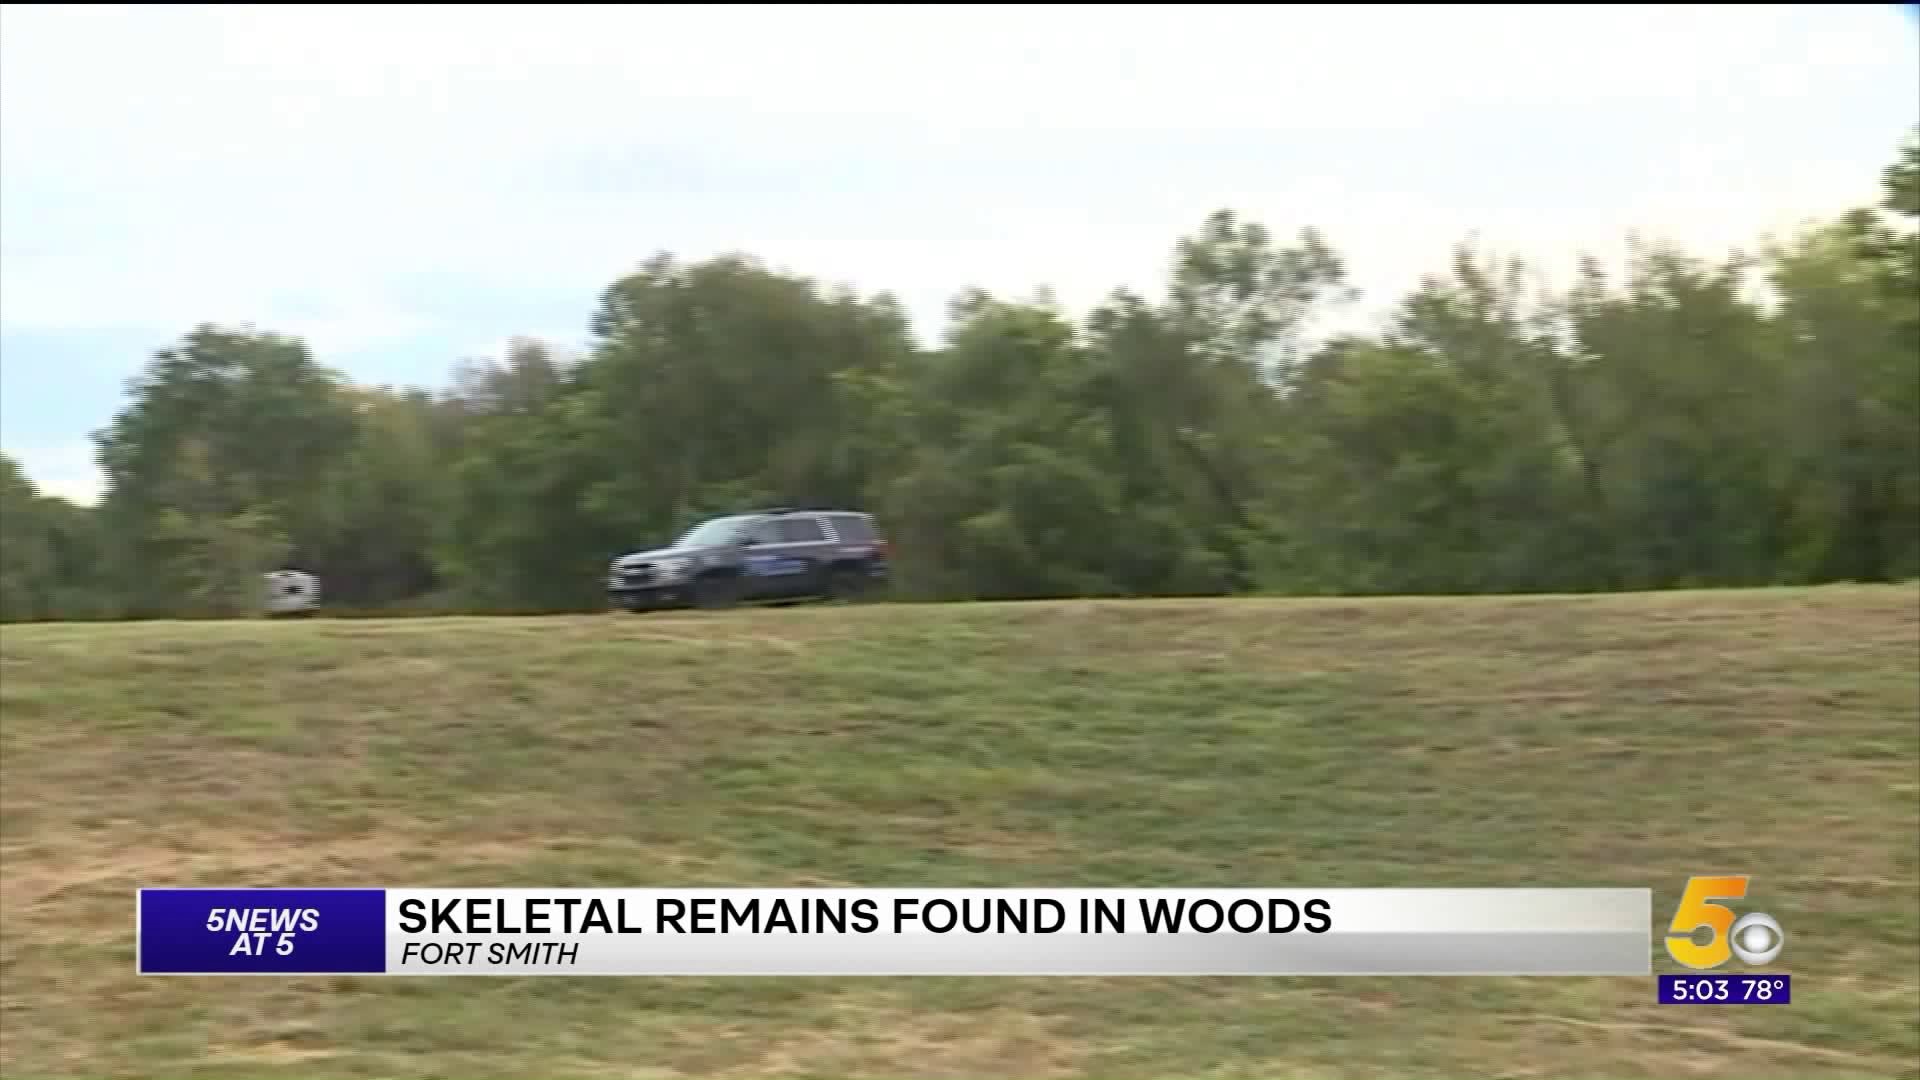 Fort Smith Police Retrieve Skeletal Remains From Woods Near Marshal`s Museum